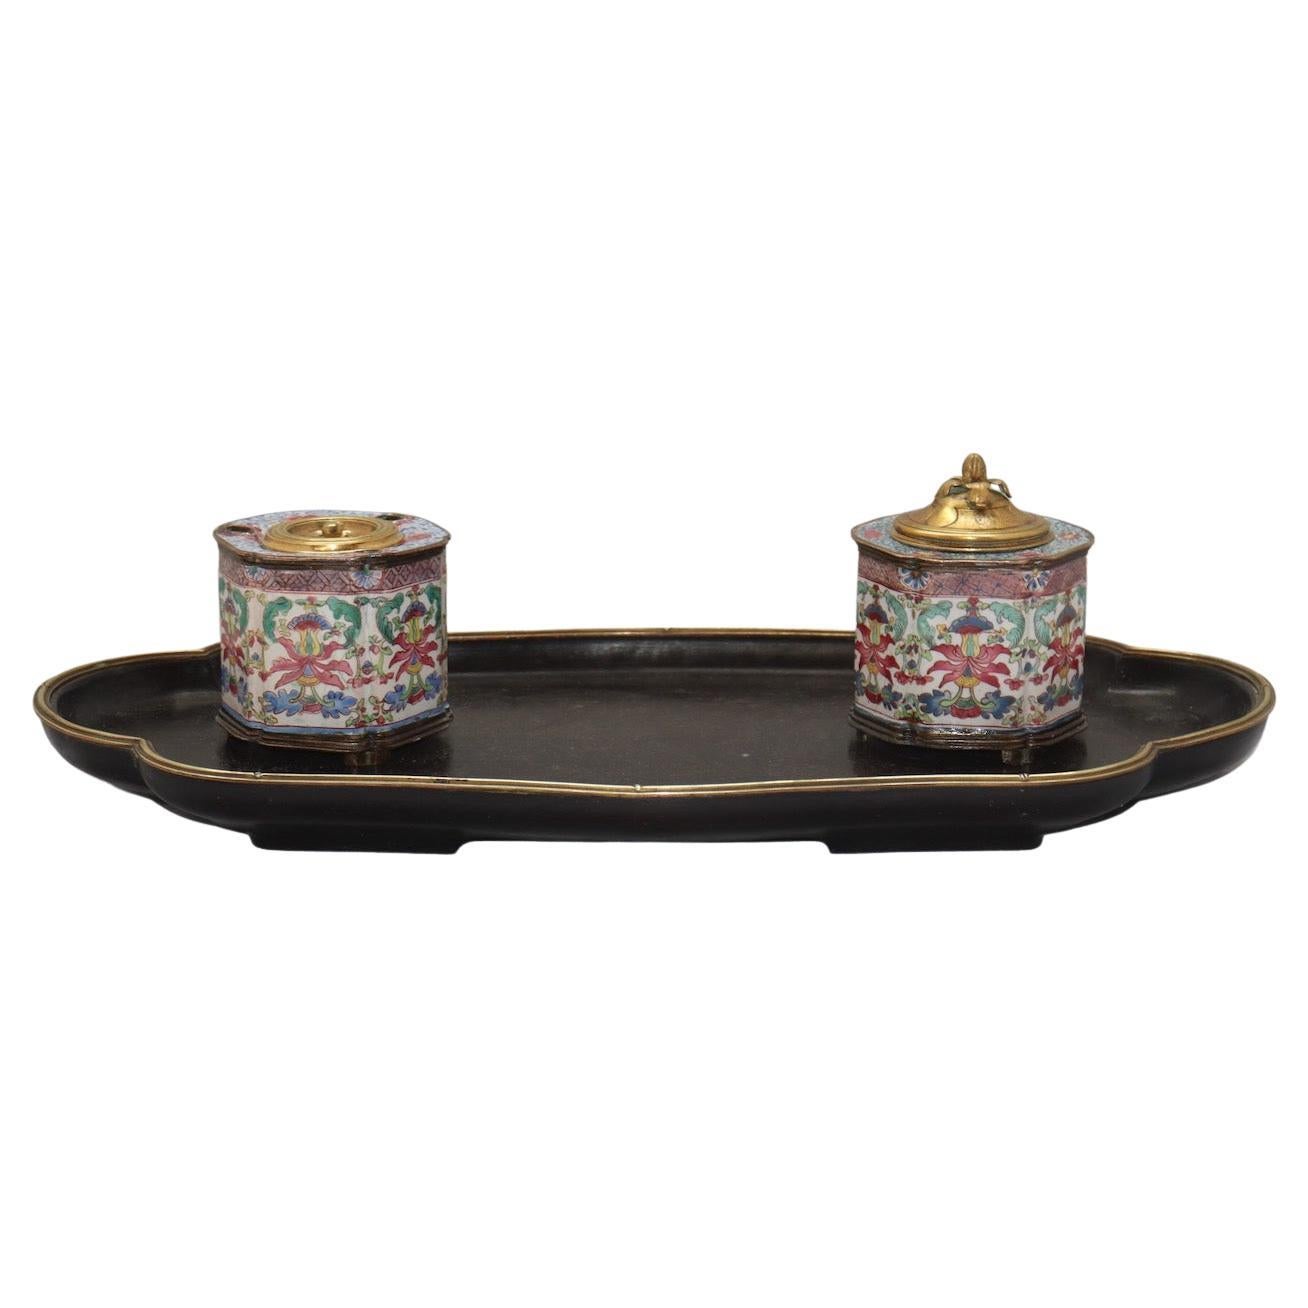 A Famille Rose Painted Enamel inkwell set Qianlong Period (1736-1795) by l’Escalier de Cristal

It consists of a fretworked tray with raised edges in blackened wood surrounded by a fine gilded bronze ring, on which rests two Famille Rose Qianlong